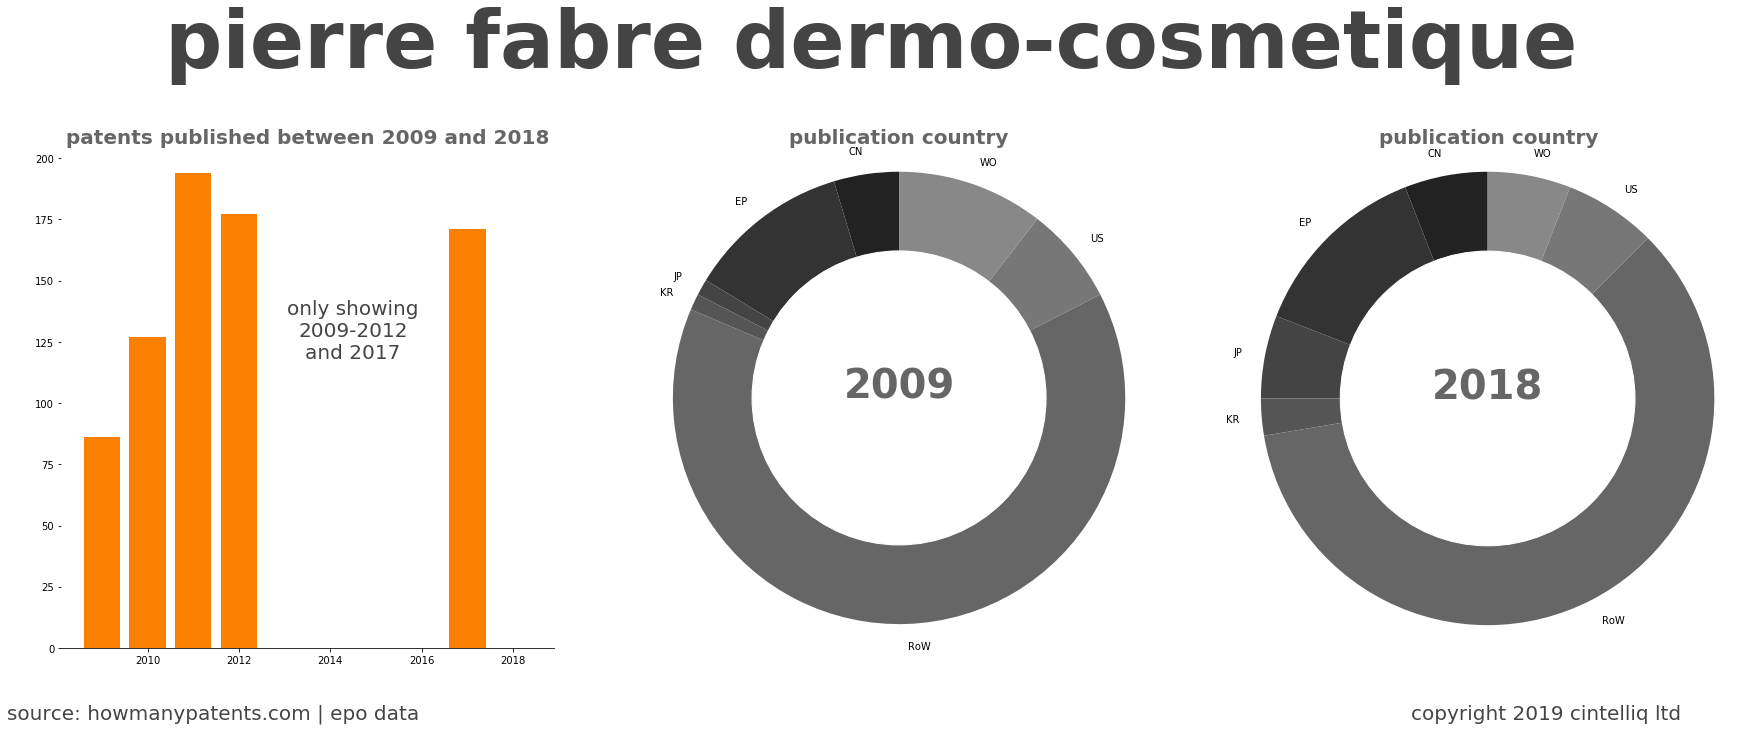 summary of patents for Pierre Fabre Dermo-Cosmetique